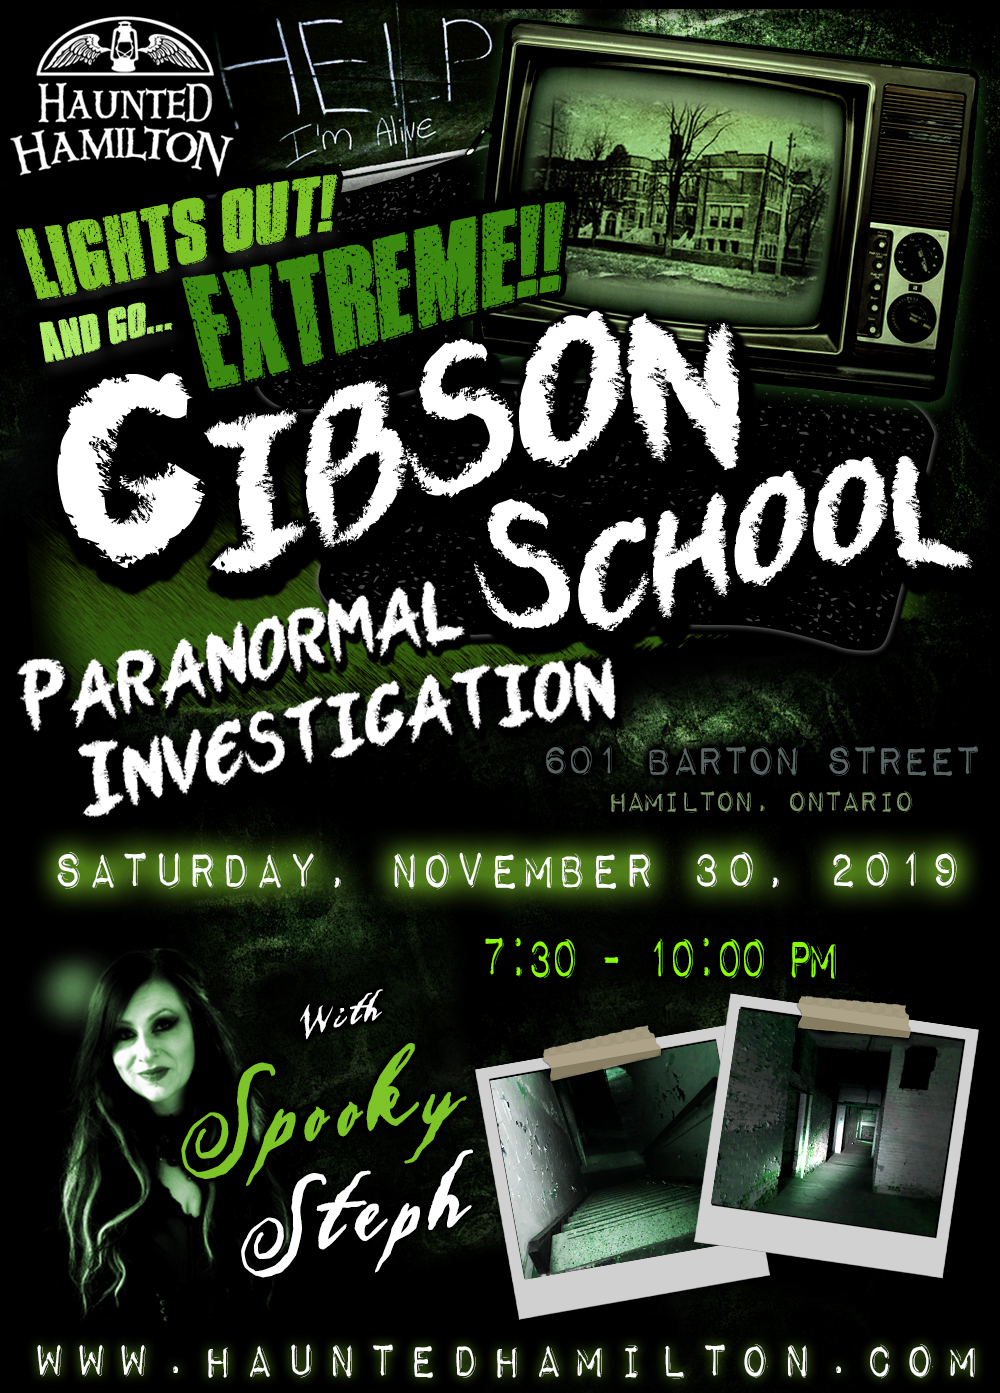 Haunted Hamilton presents... "LIGHTS OUT! And go EXTREME at GIBSON SCHOOL" | An intimate, interactive, behind-the-scenes Paranormal Investigation at Gibson School in Hamilton, Ontario, Canada!